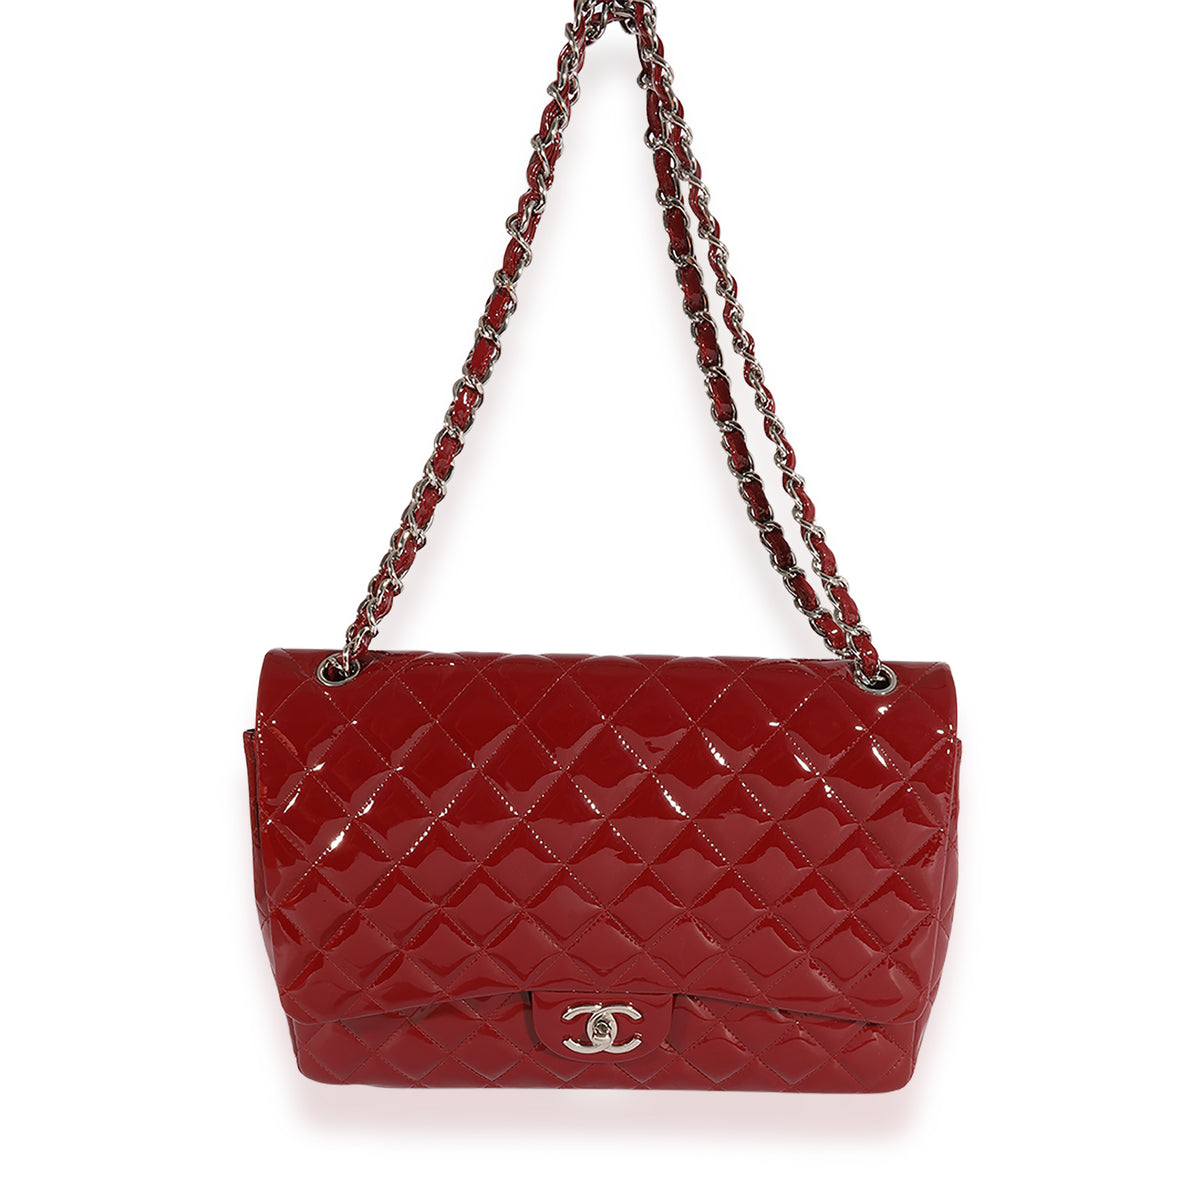 Chanel Dark Red Quilted Patent Leather Maxi Classic Double Flap Bag, myGemma